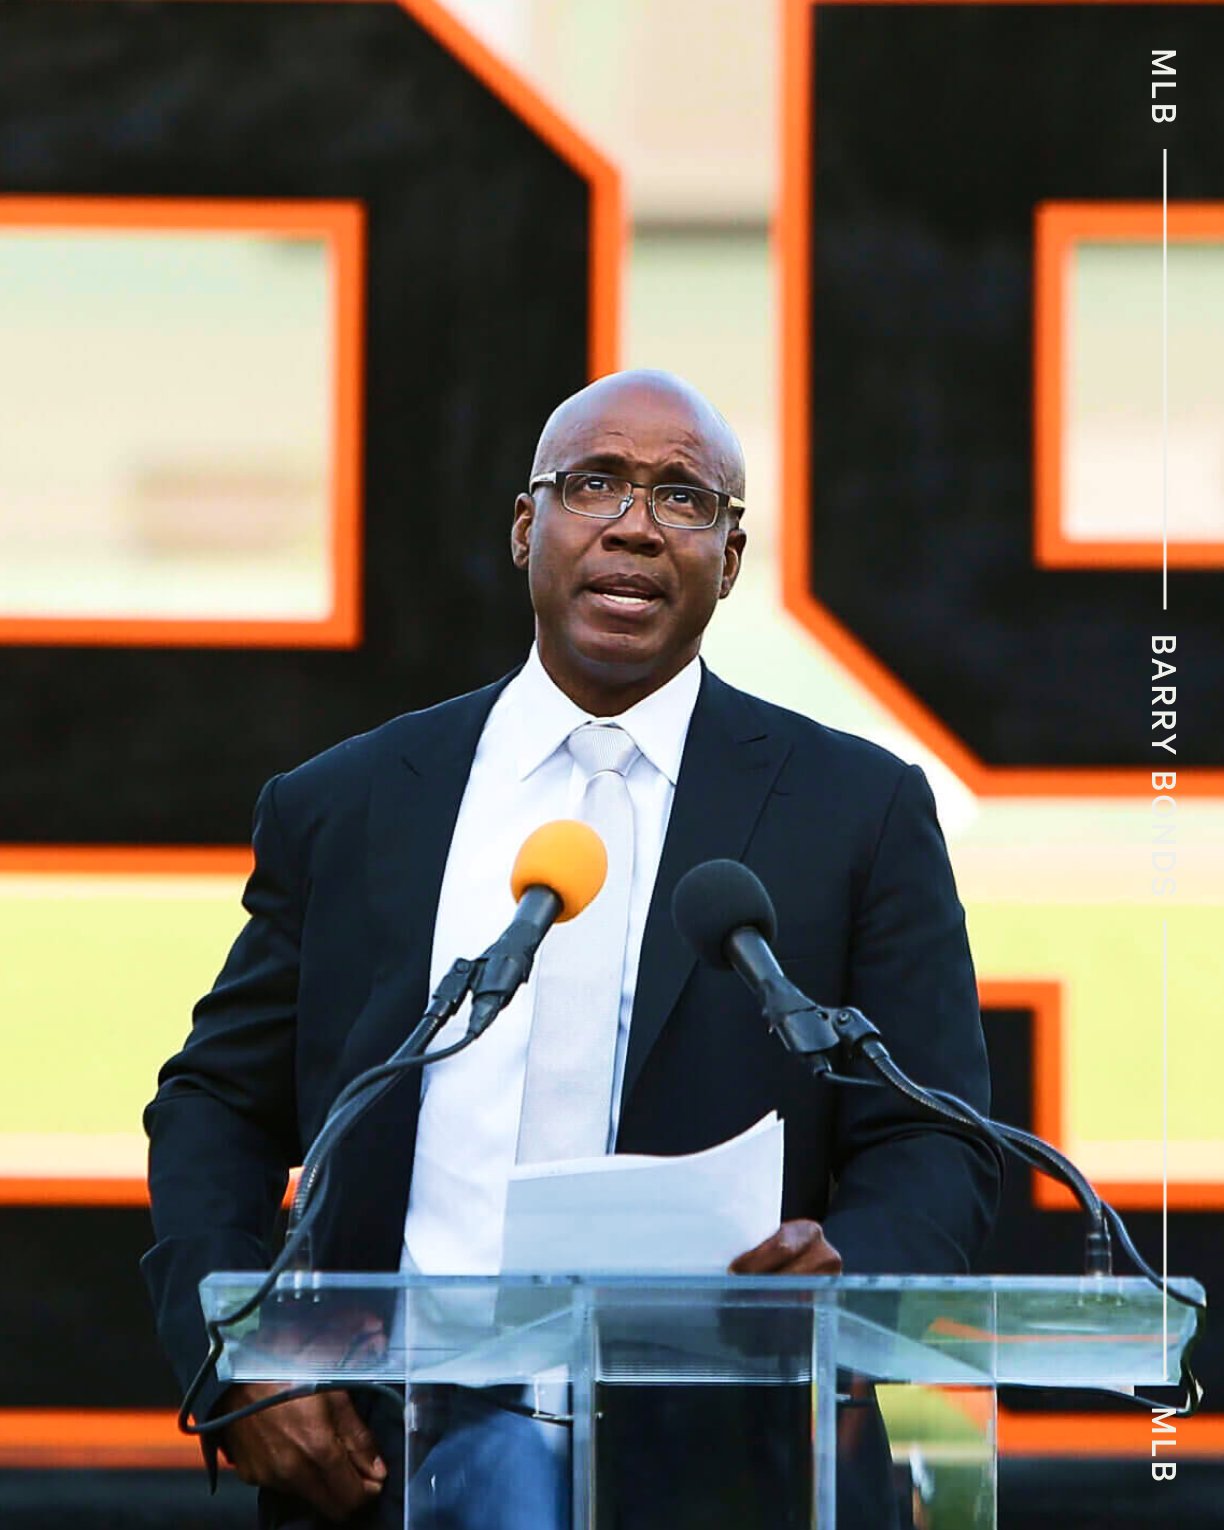 The Athletic on X: Barry Bonds timed out on the BBWAA Hall of